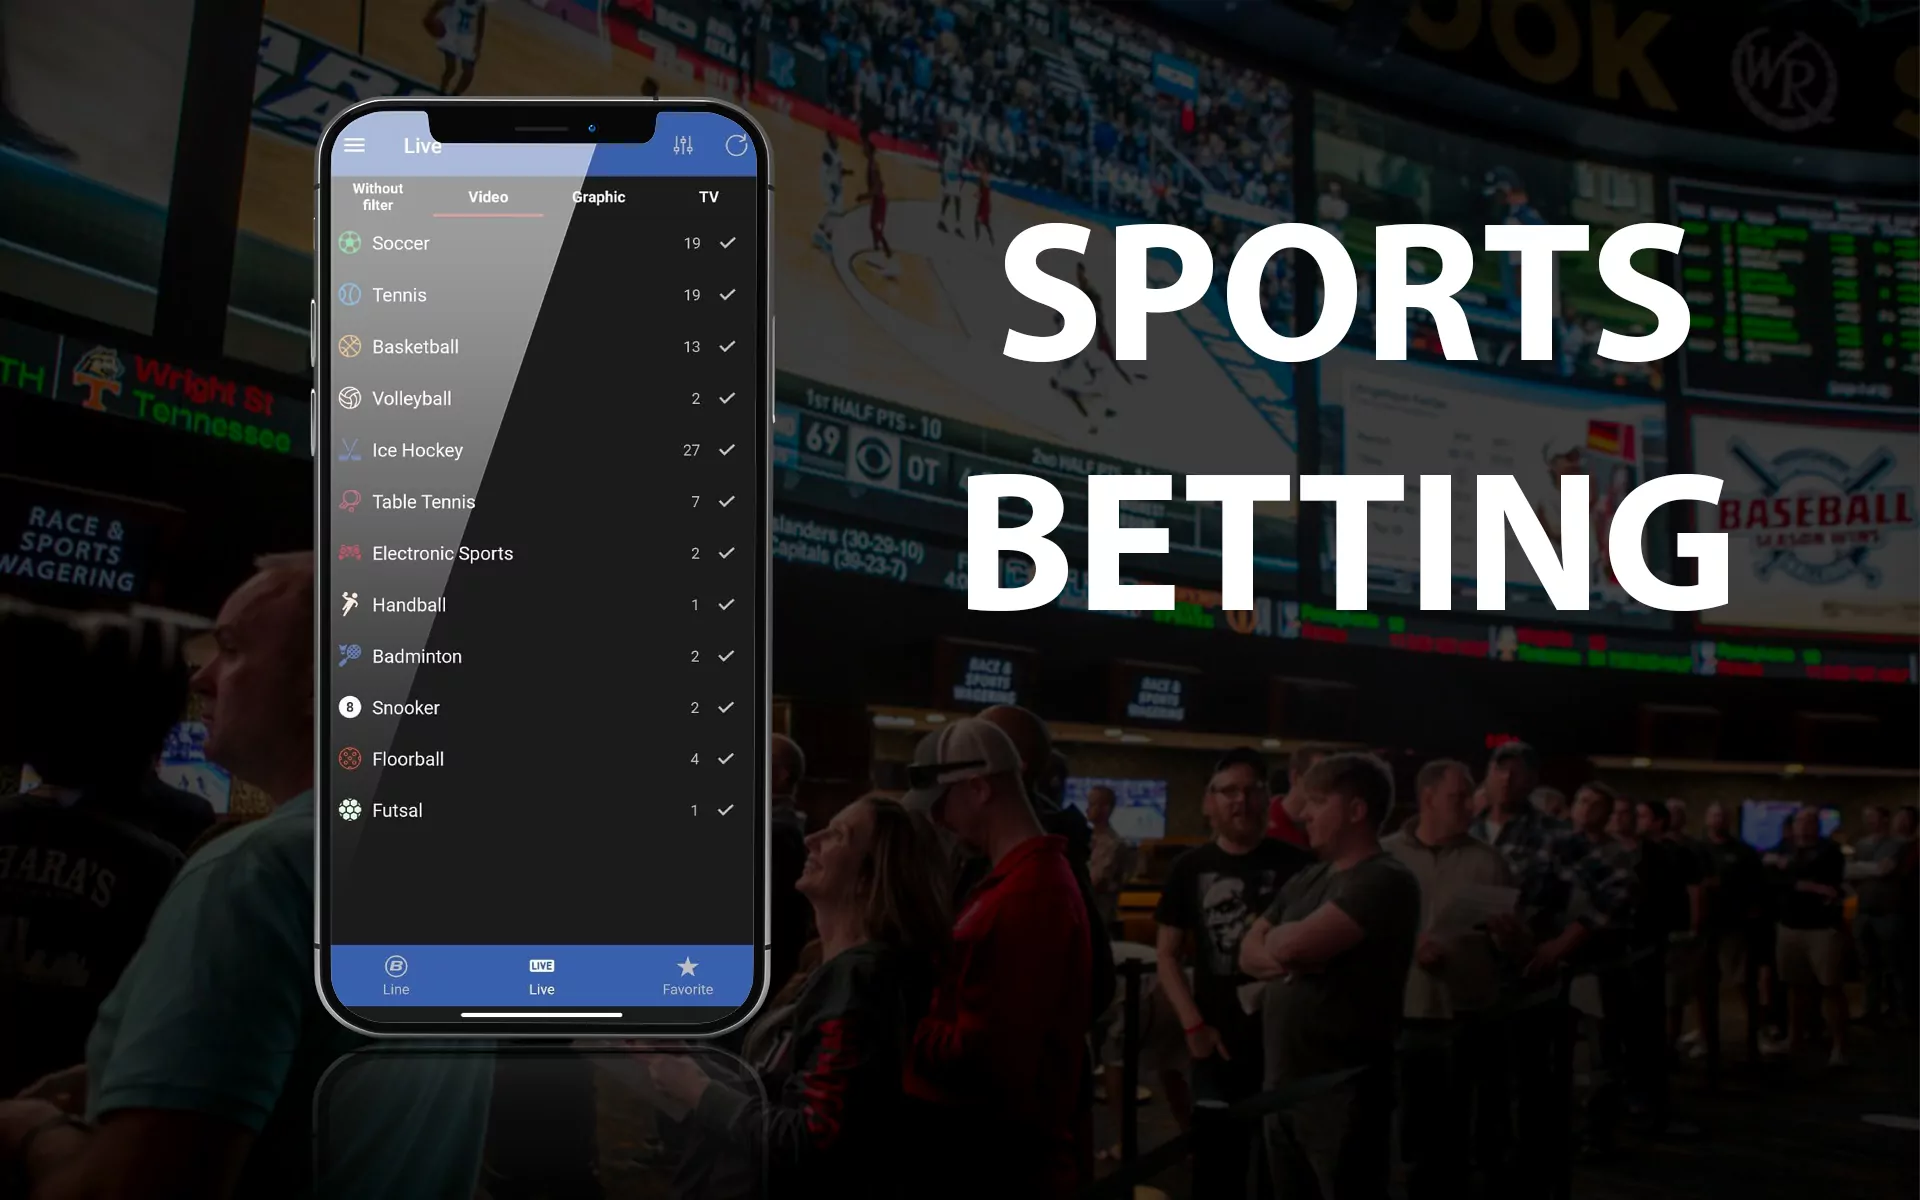 There is a huge range of sports disciplines available for betting.